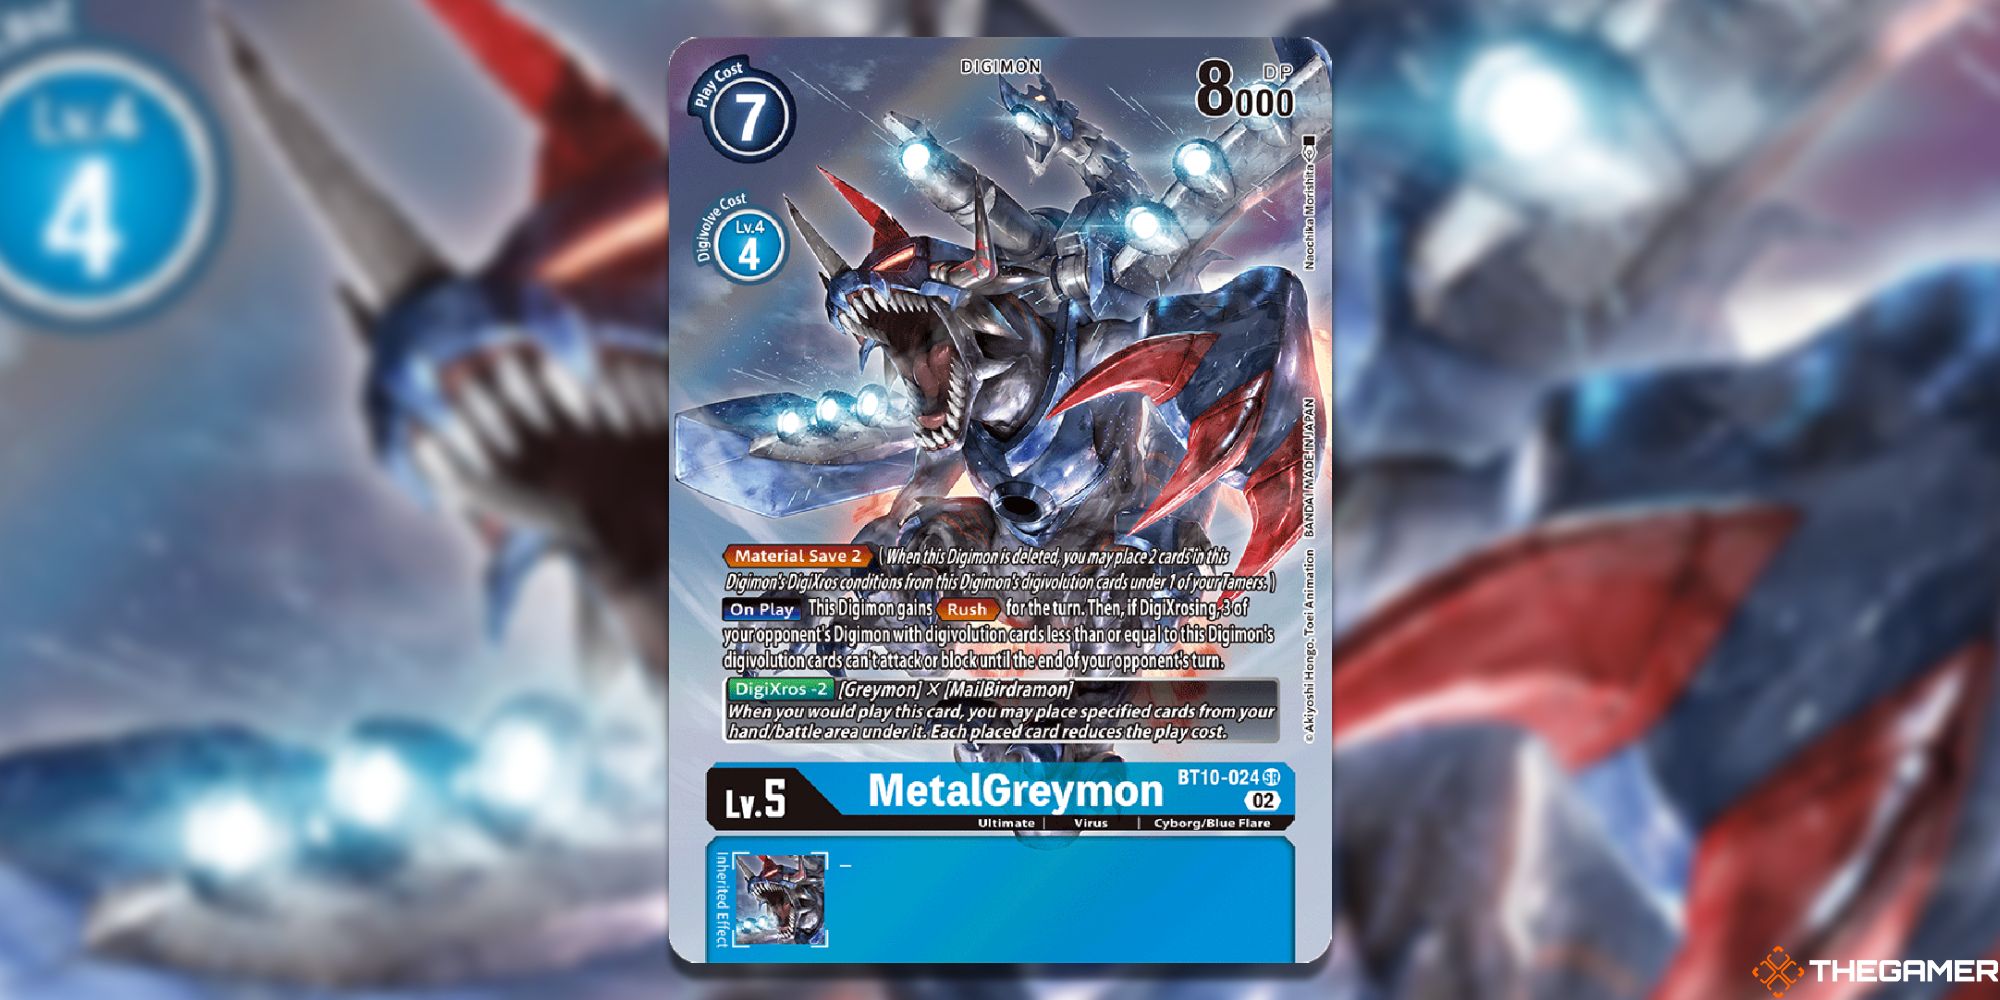 metalgreymon alt card from digimon card game with blur background